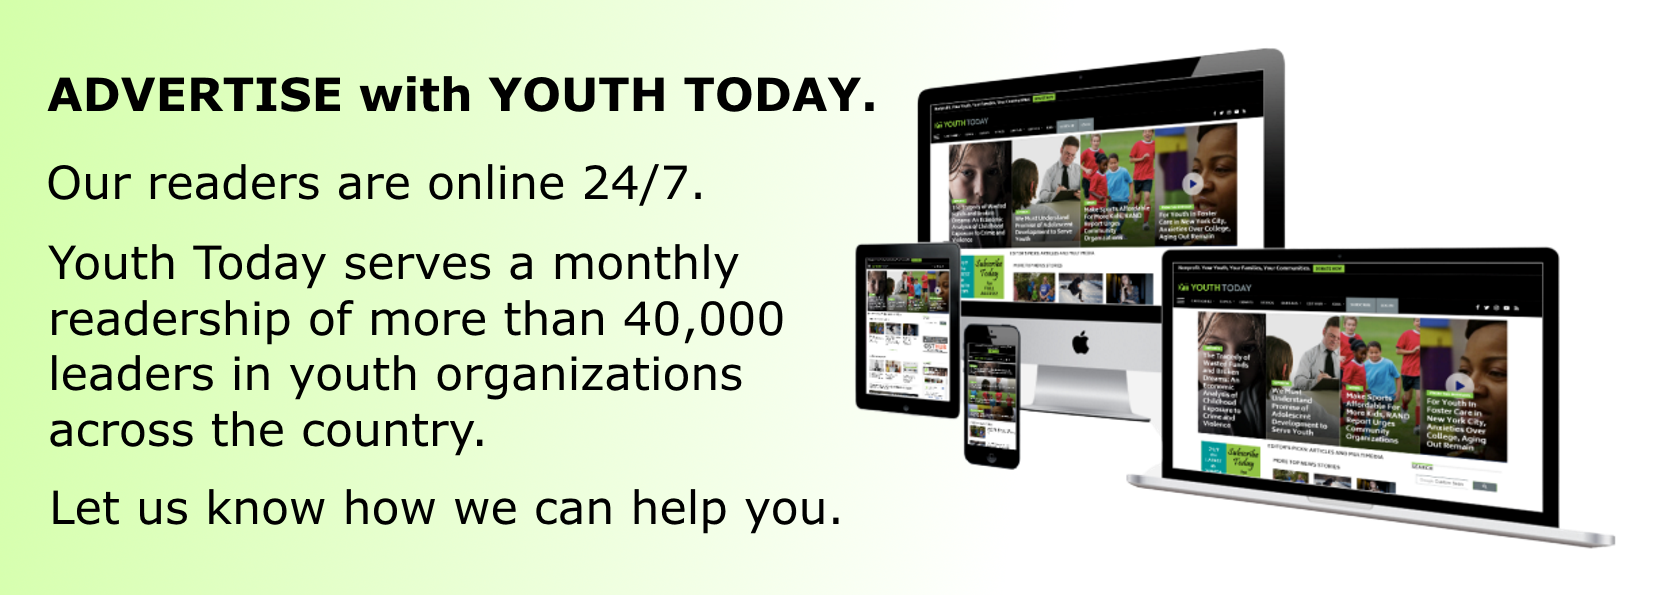 Various size computer, tablet & phone screens with text promoting advertising with Youth Today and 24/7 access.